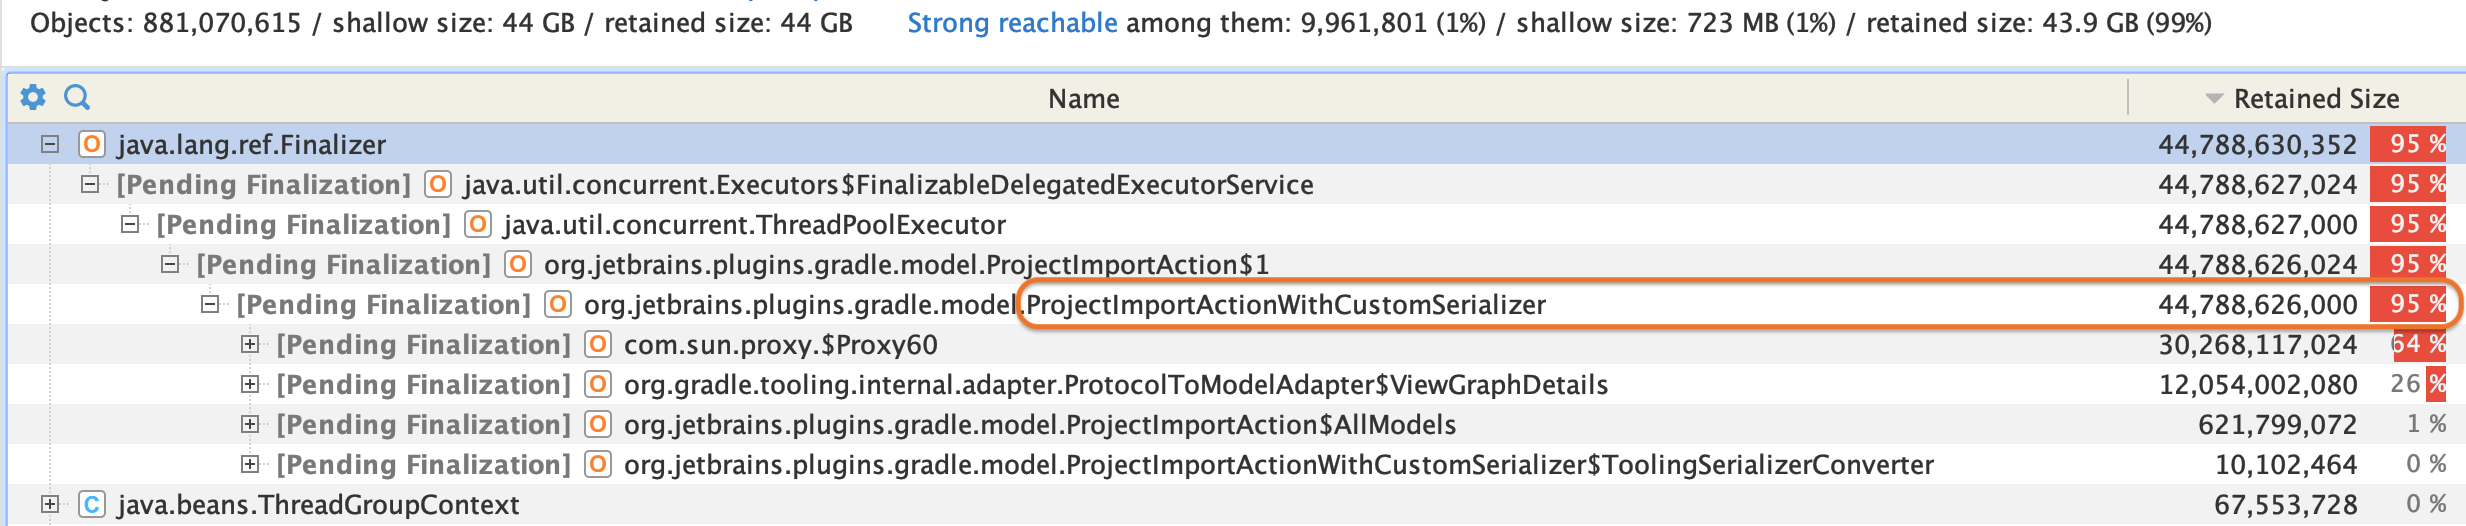 ProjectImportActionWithCustomSerializer dominator